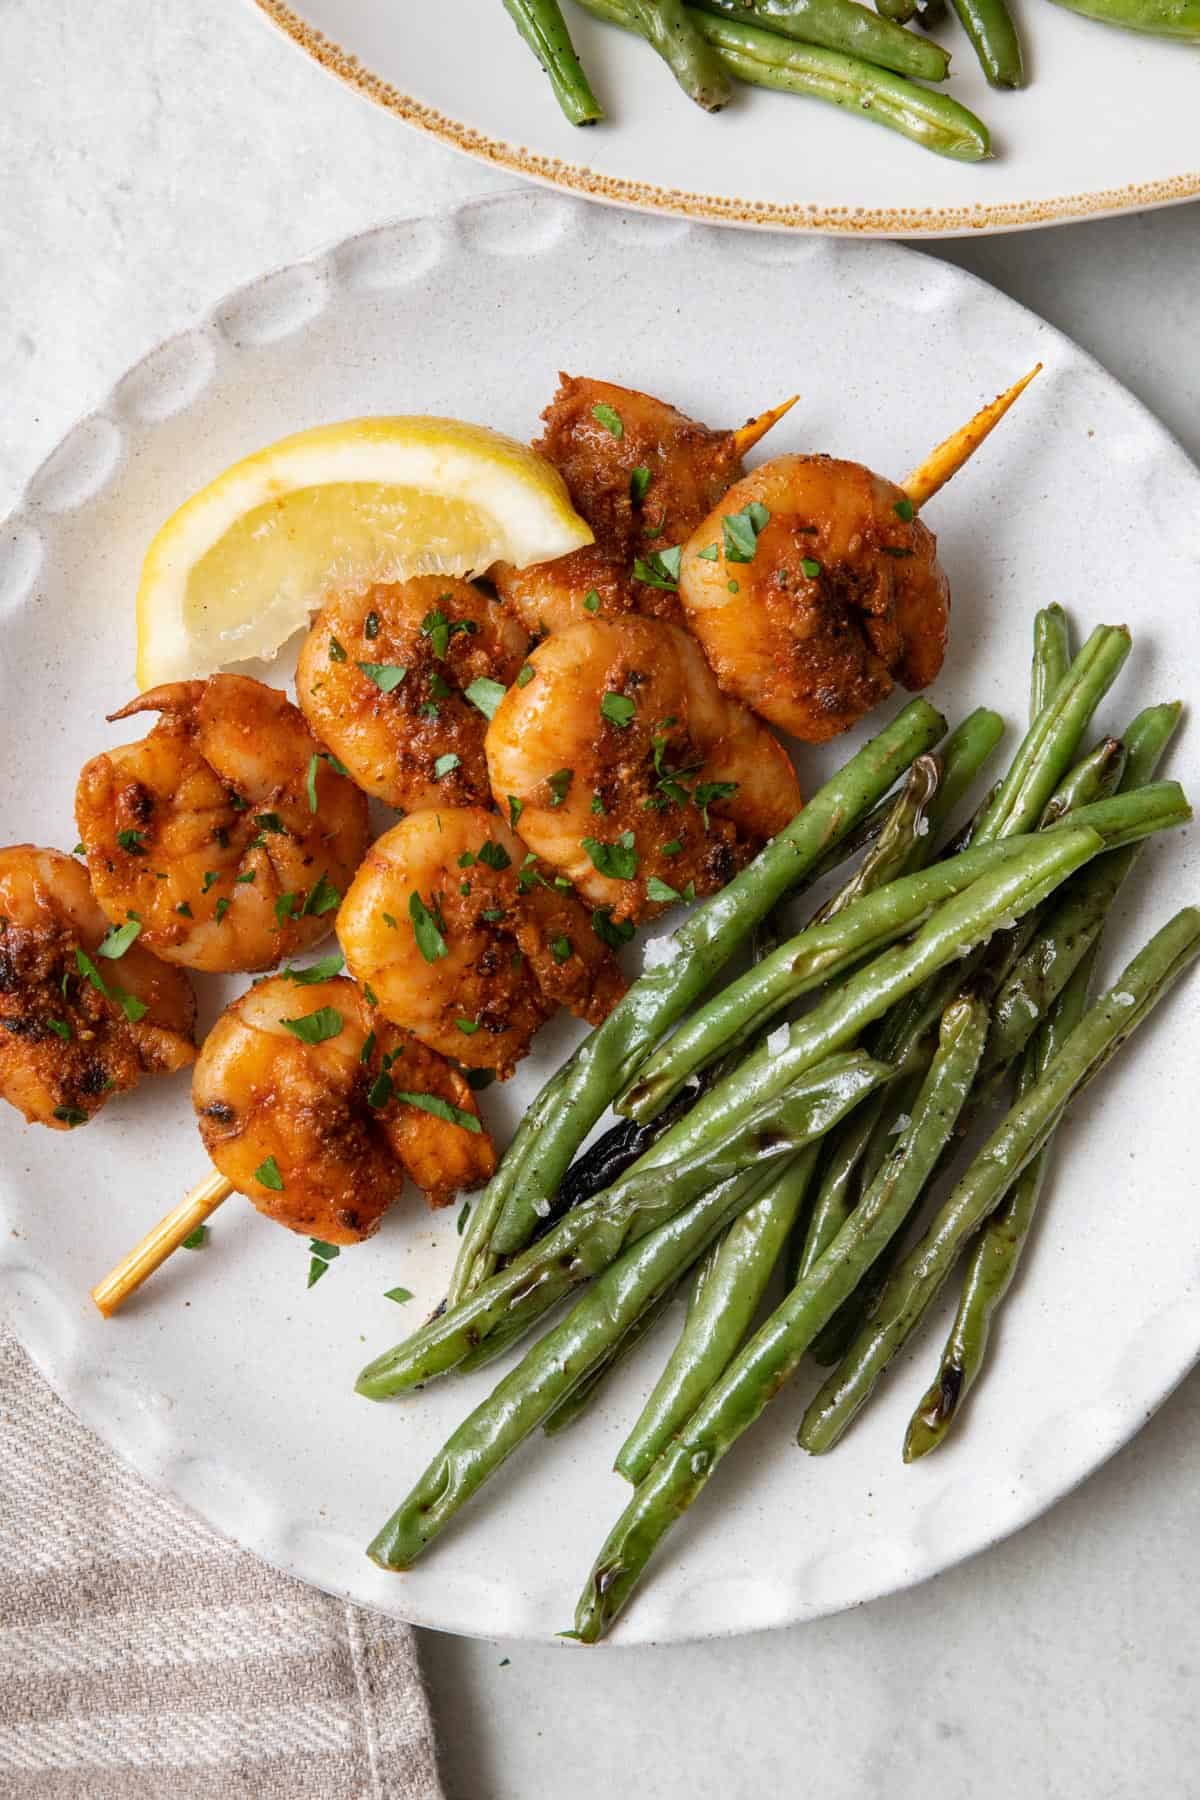 Grilled green beans on a plate with seasoned shrimp skewers.